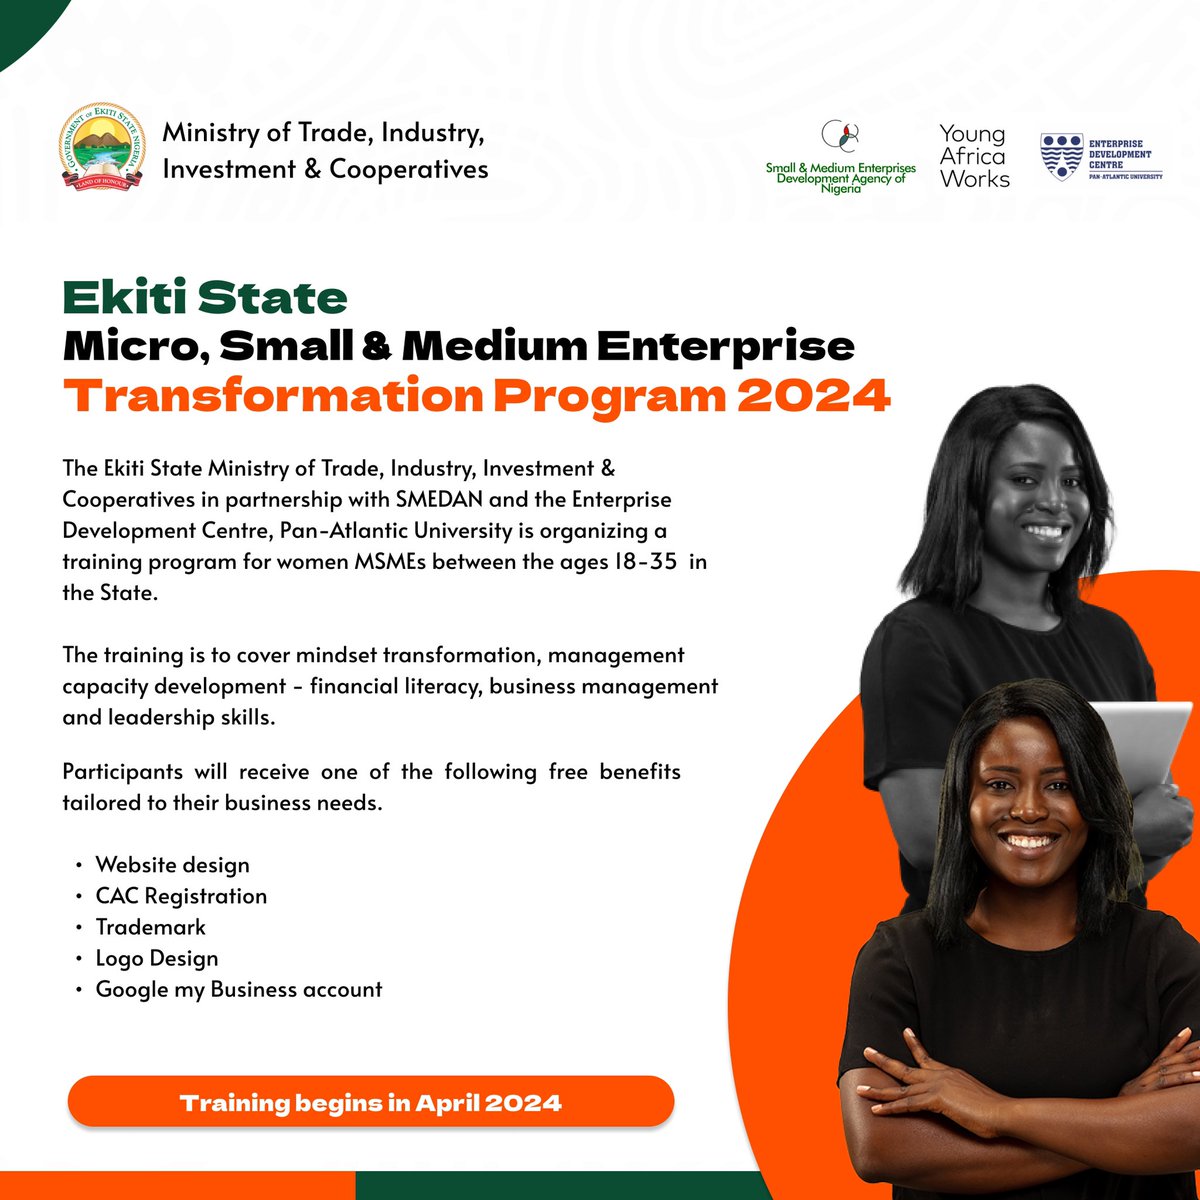 We are thrilled to announce that the Ekiti State MSME Transformation Program commences in a couple of days. #EkitiMSME #InvestEkiti